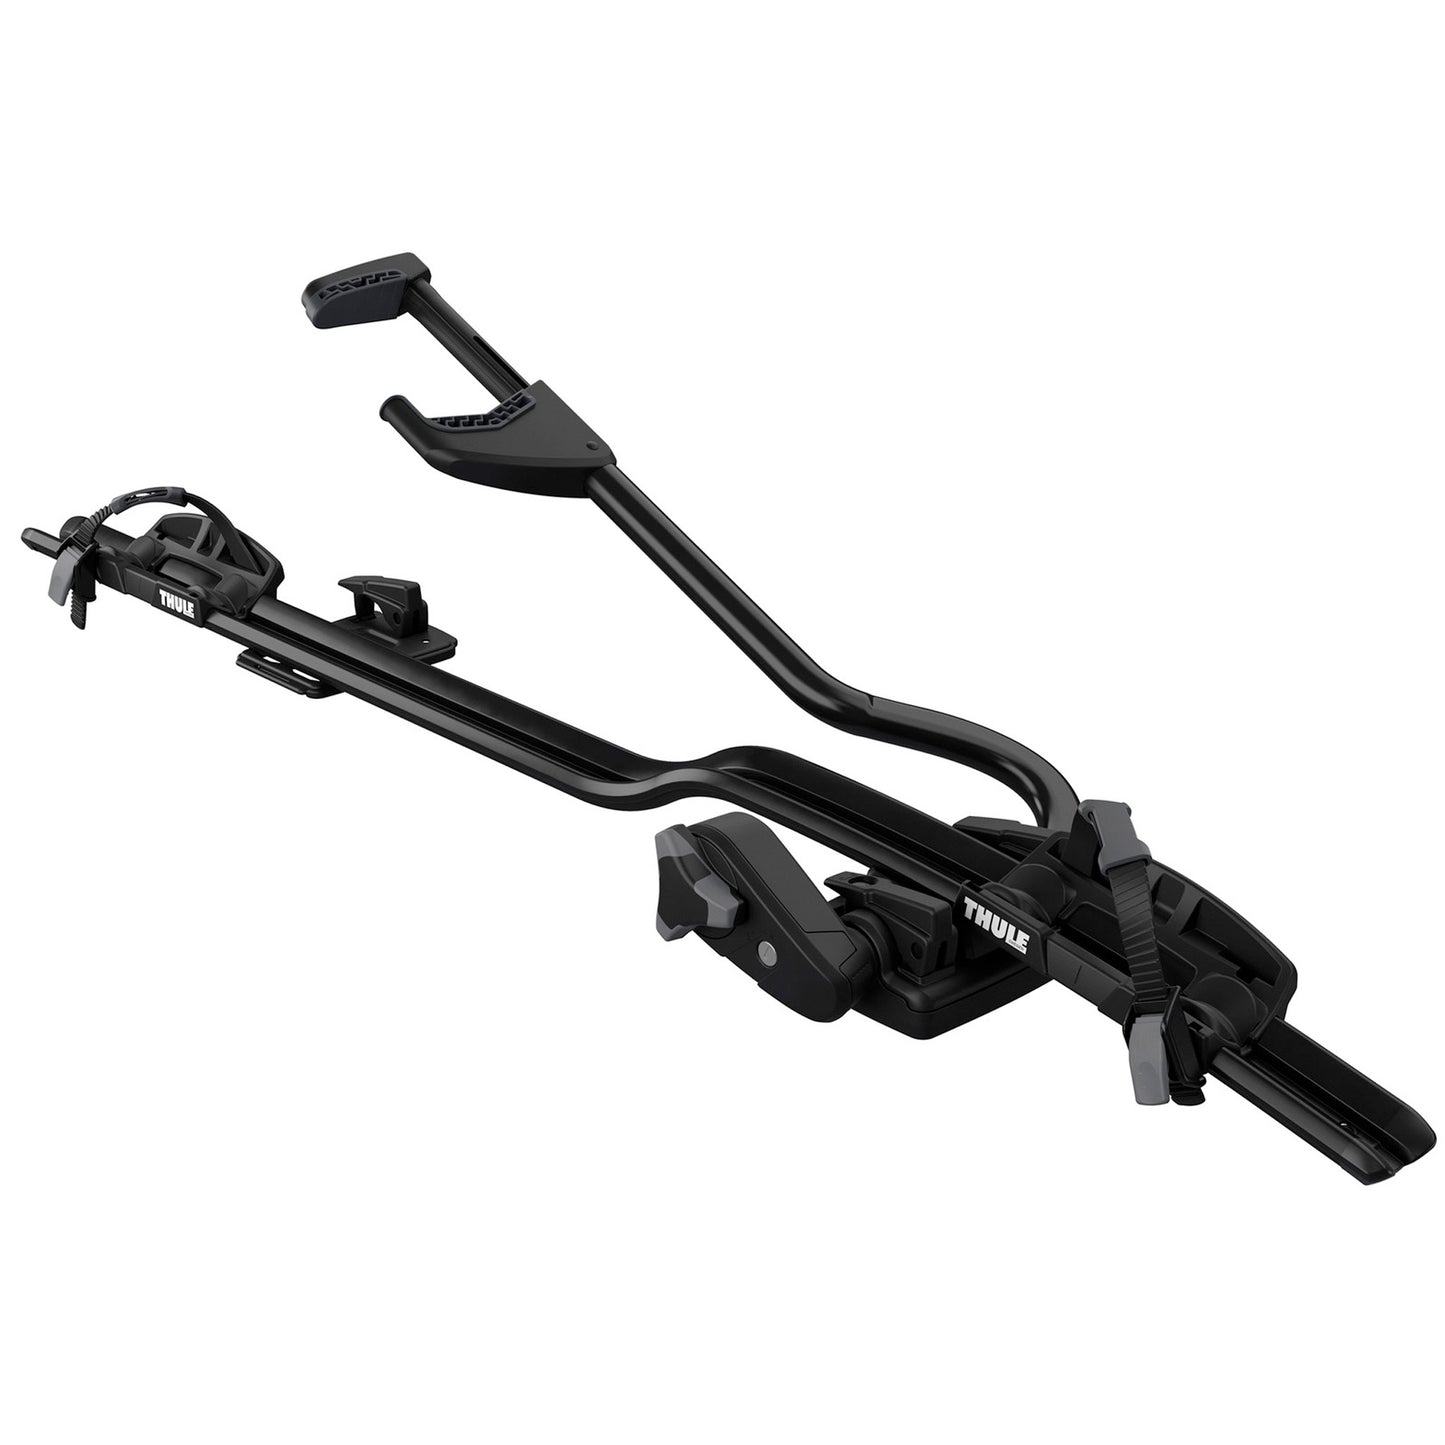 Thule Pro Ride 598 Single Bike Rack, Black buy online at Woolys Wheels with free delivery